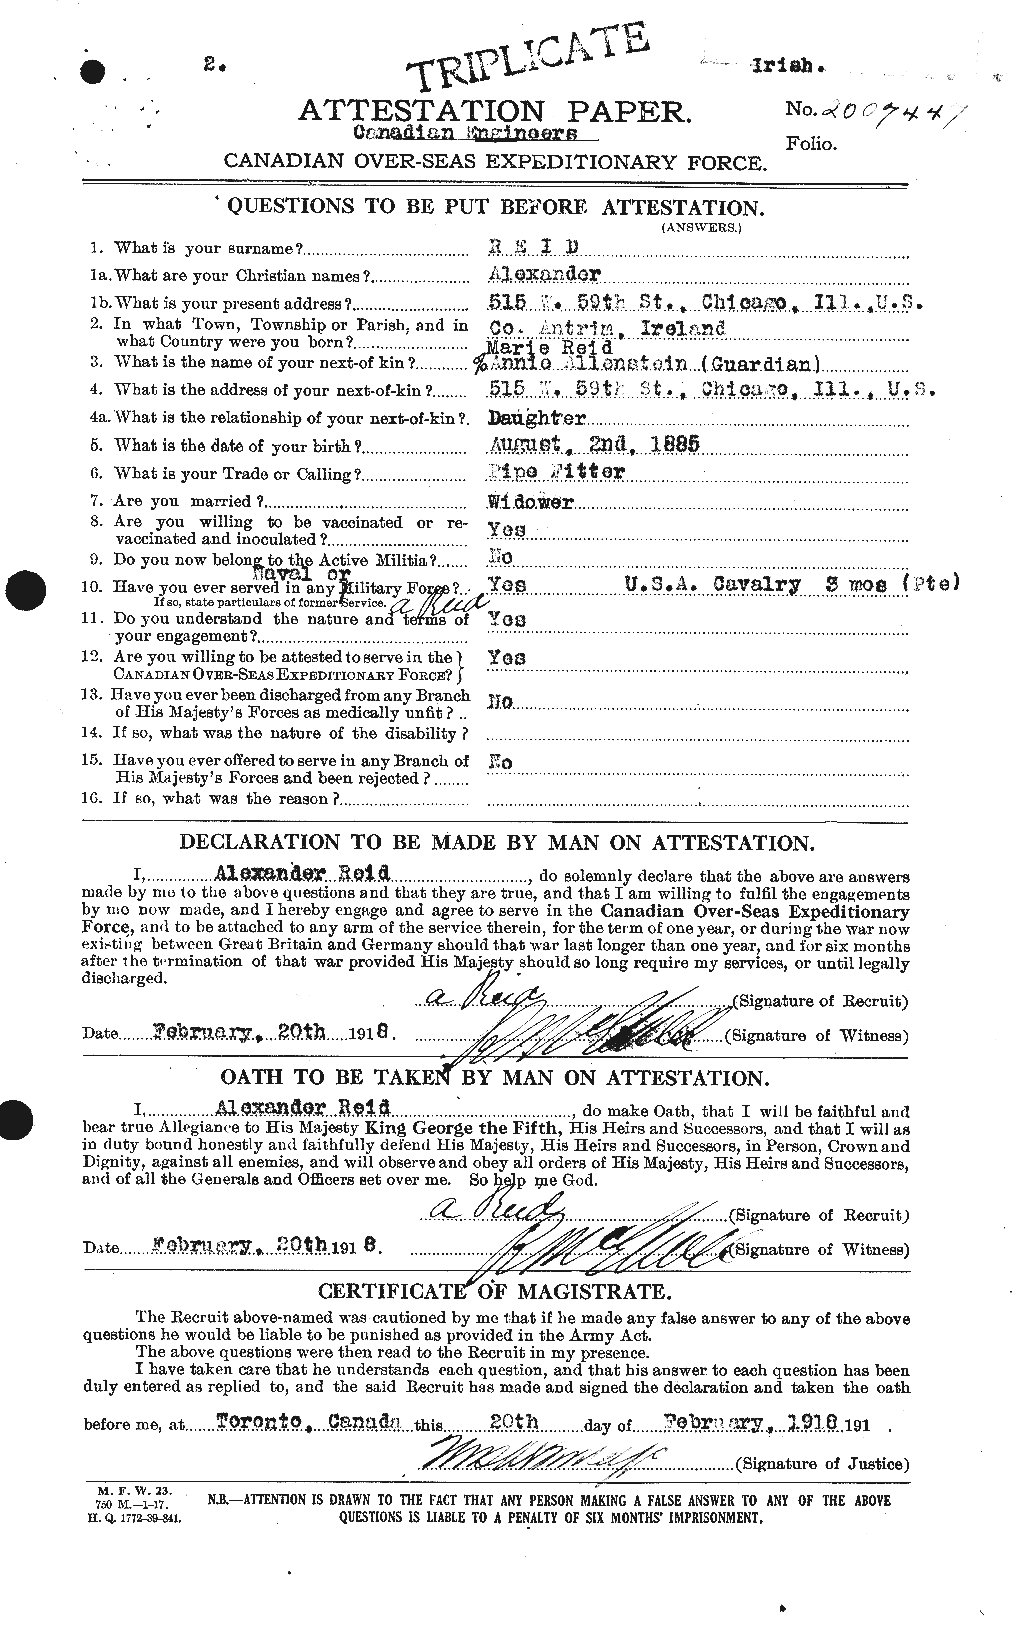 Personnel Records of the First World War - CEF 597768a